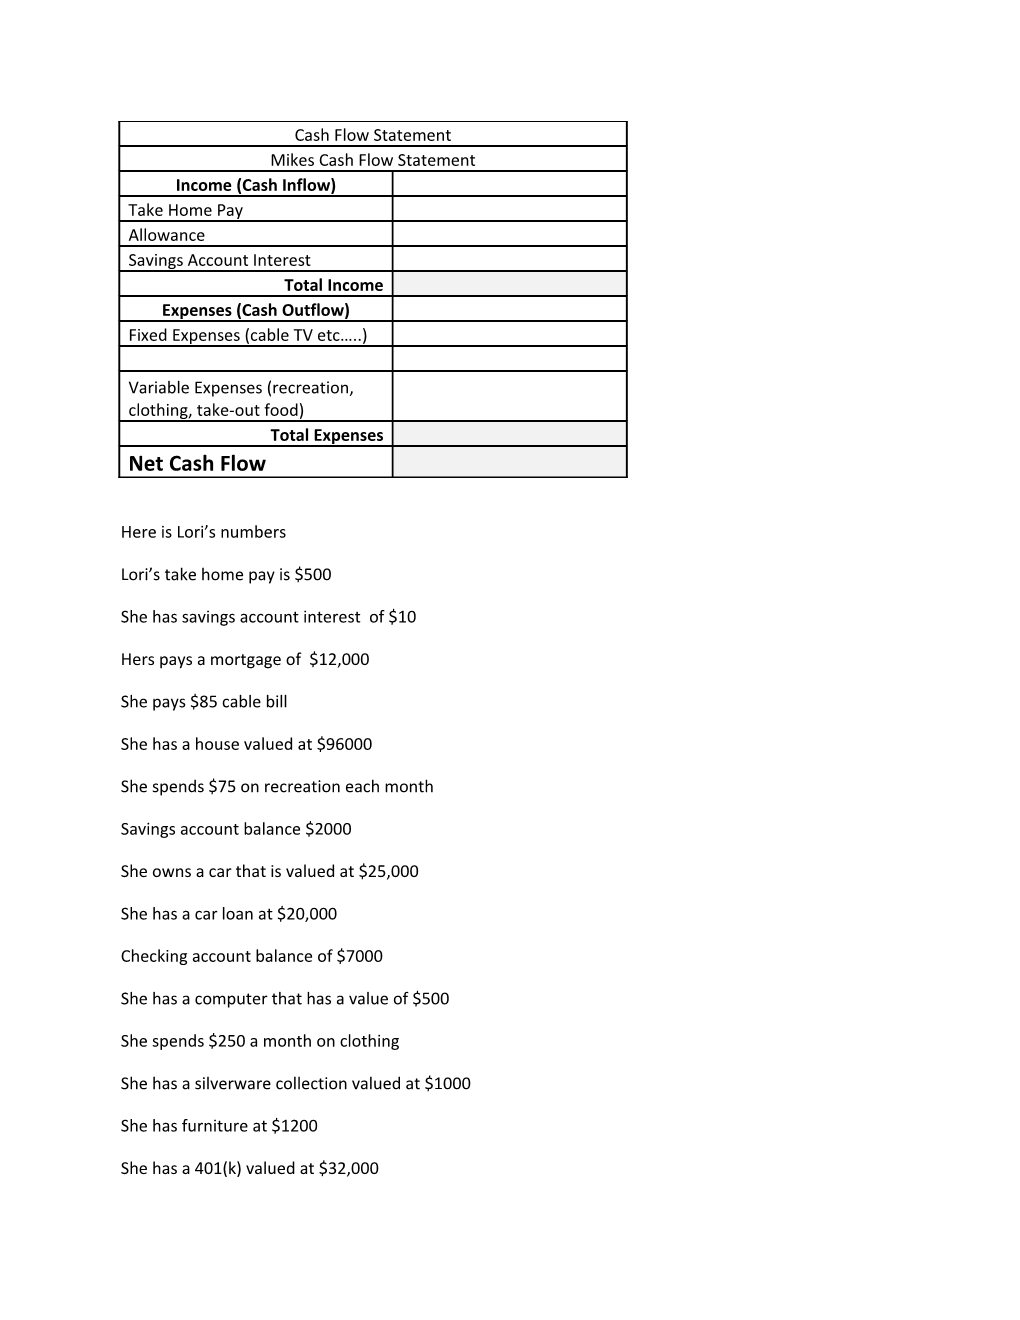 Personal Balance Sheet and Cash Flow Statement Review